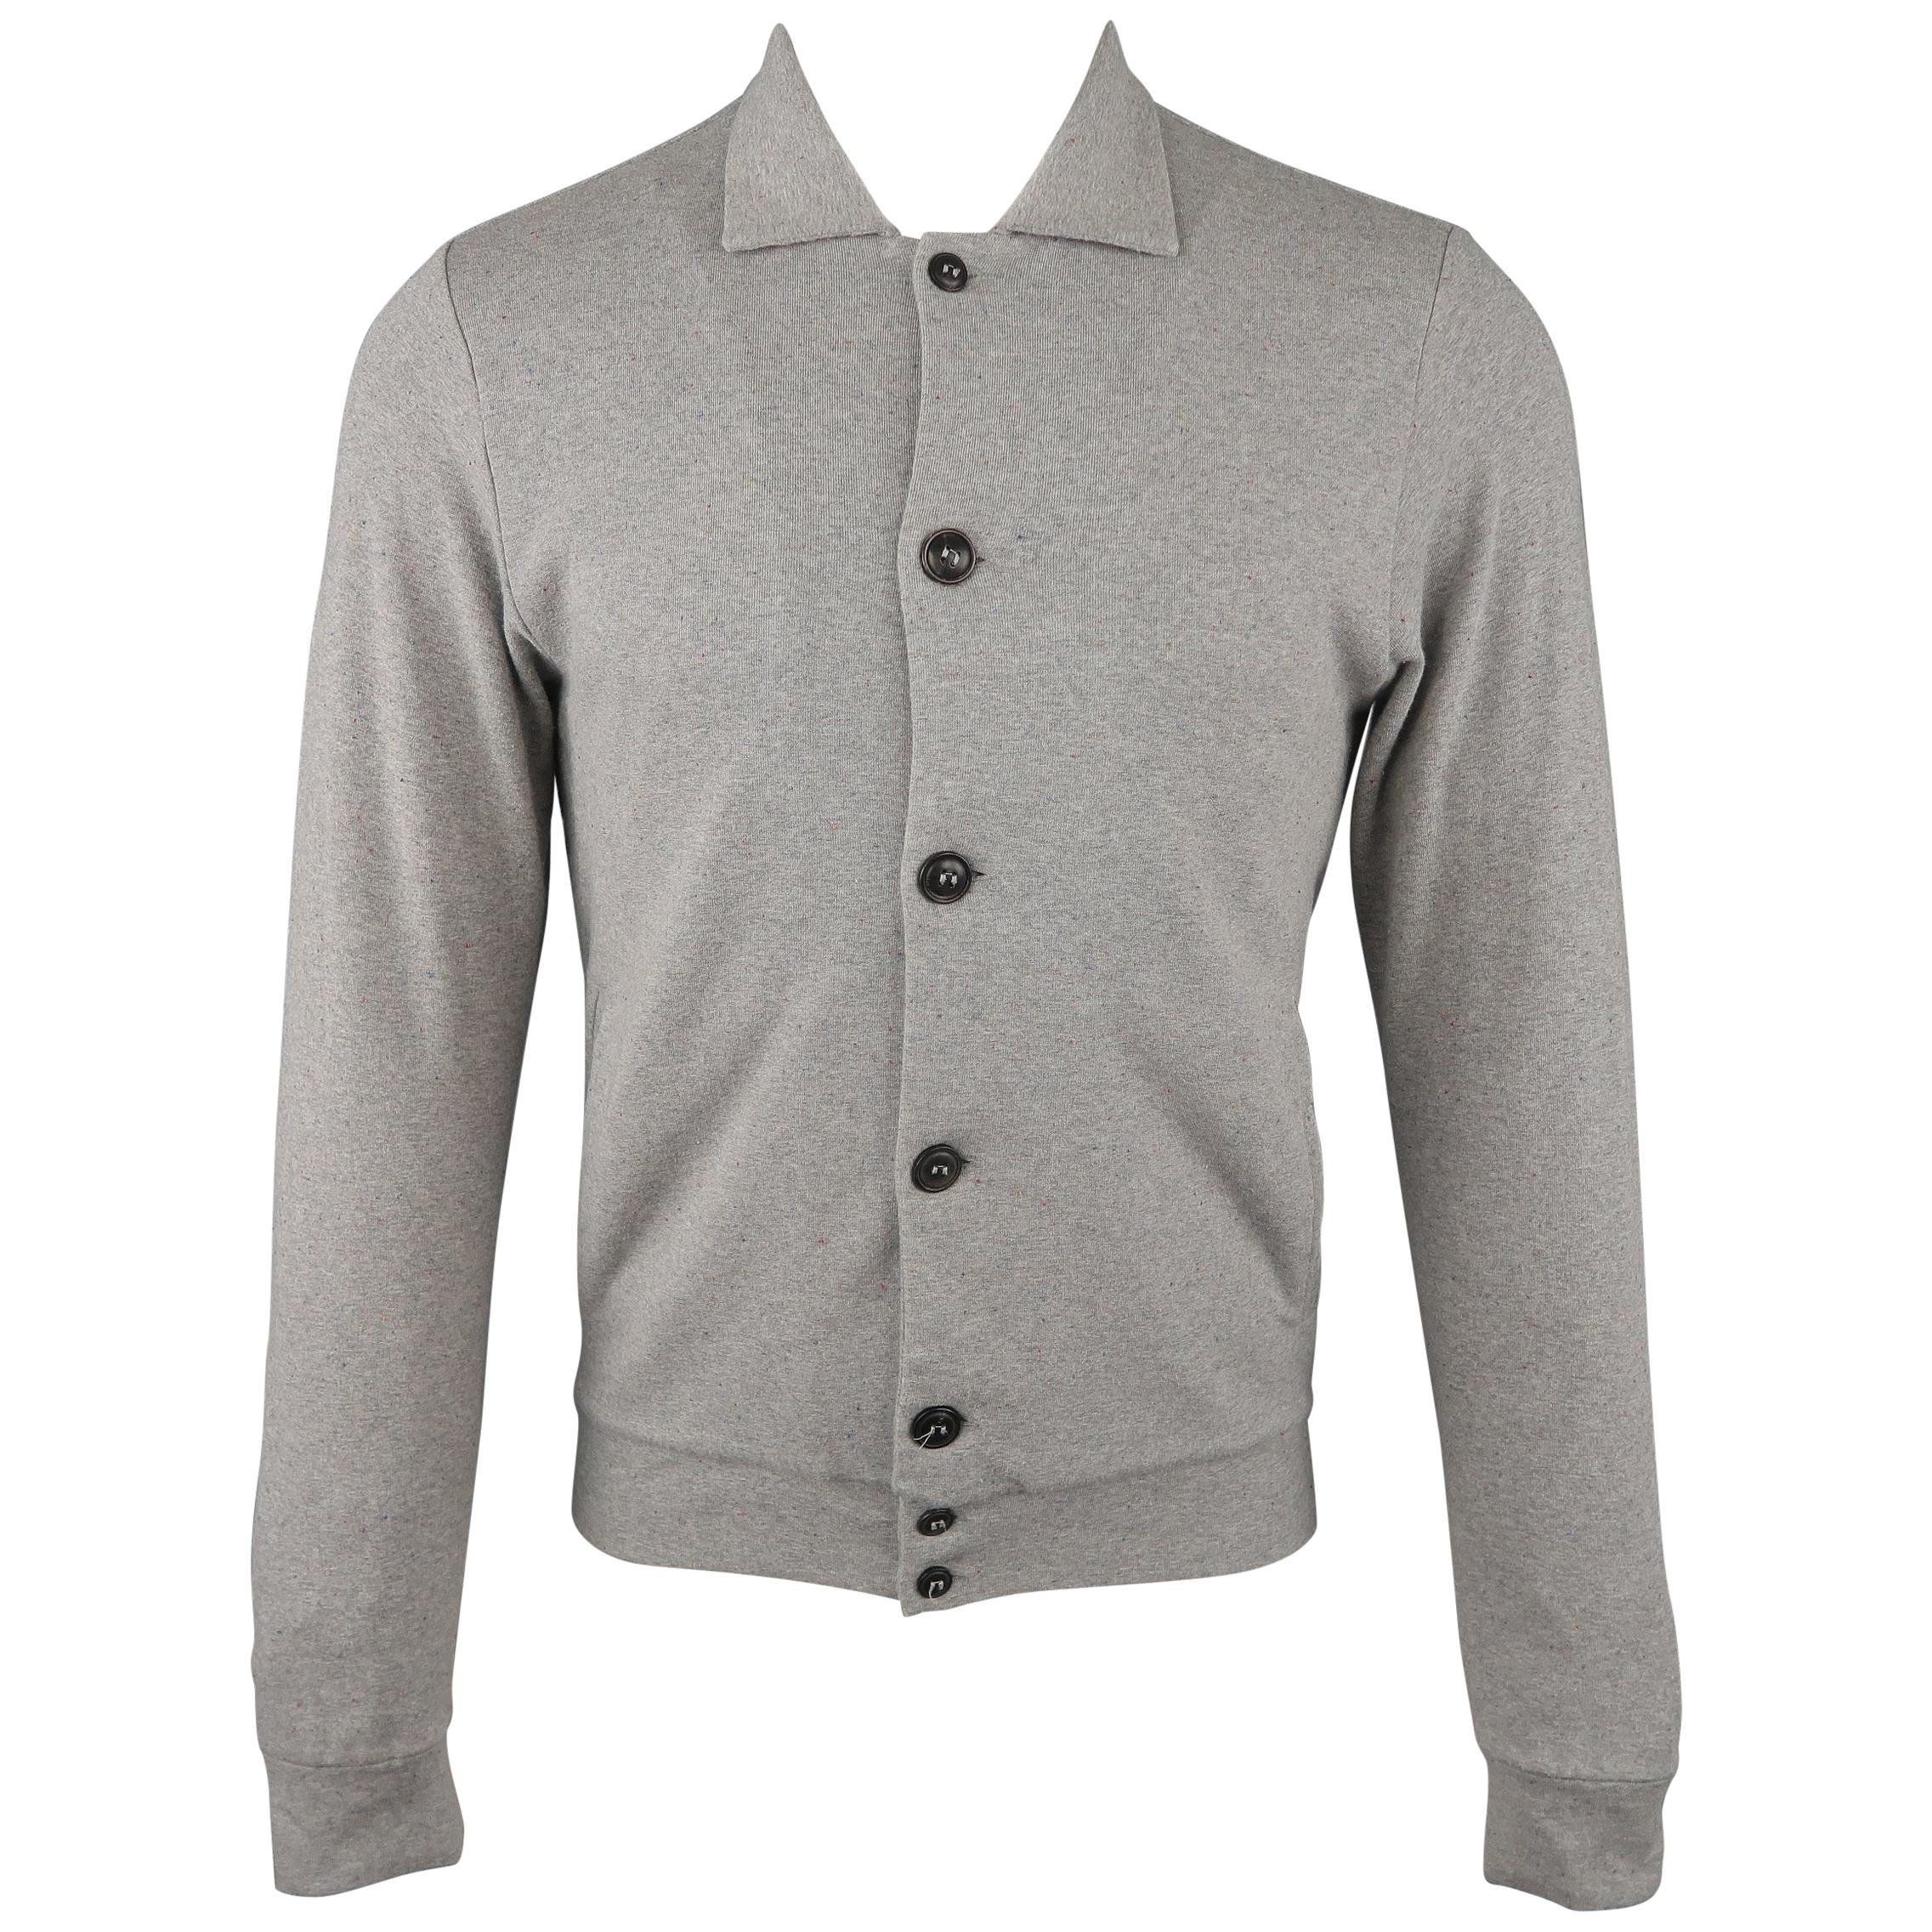 HOMECORE S Heather Gray Speckled Jersey Button Up Collared Jacket